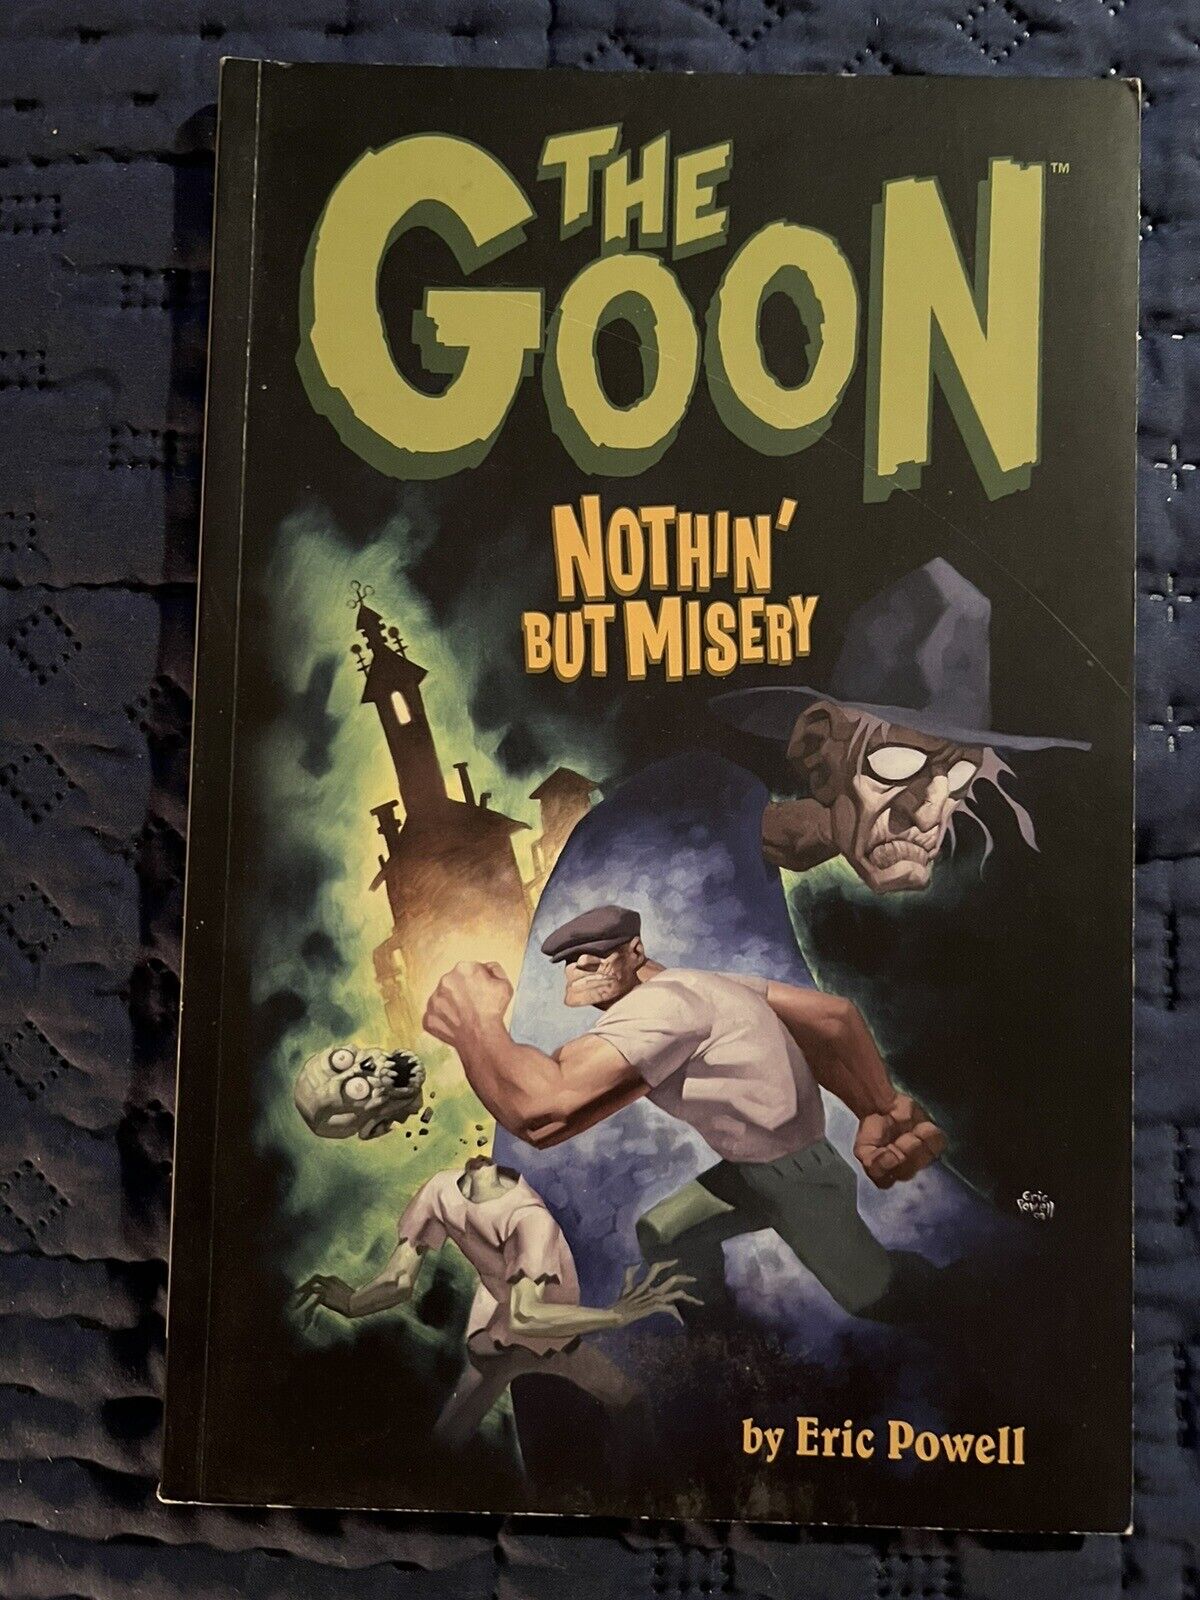 The Goon, Nothin\' But Misery, Eric Powell, zombie priest and gang